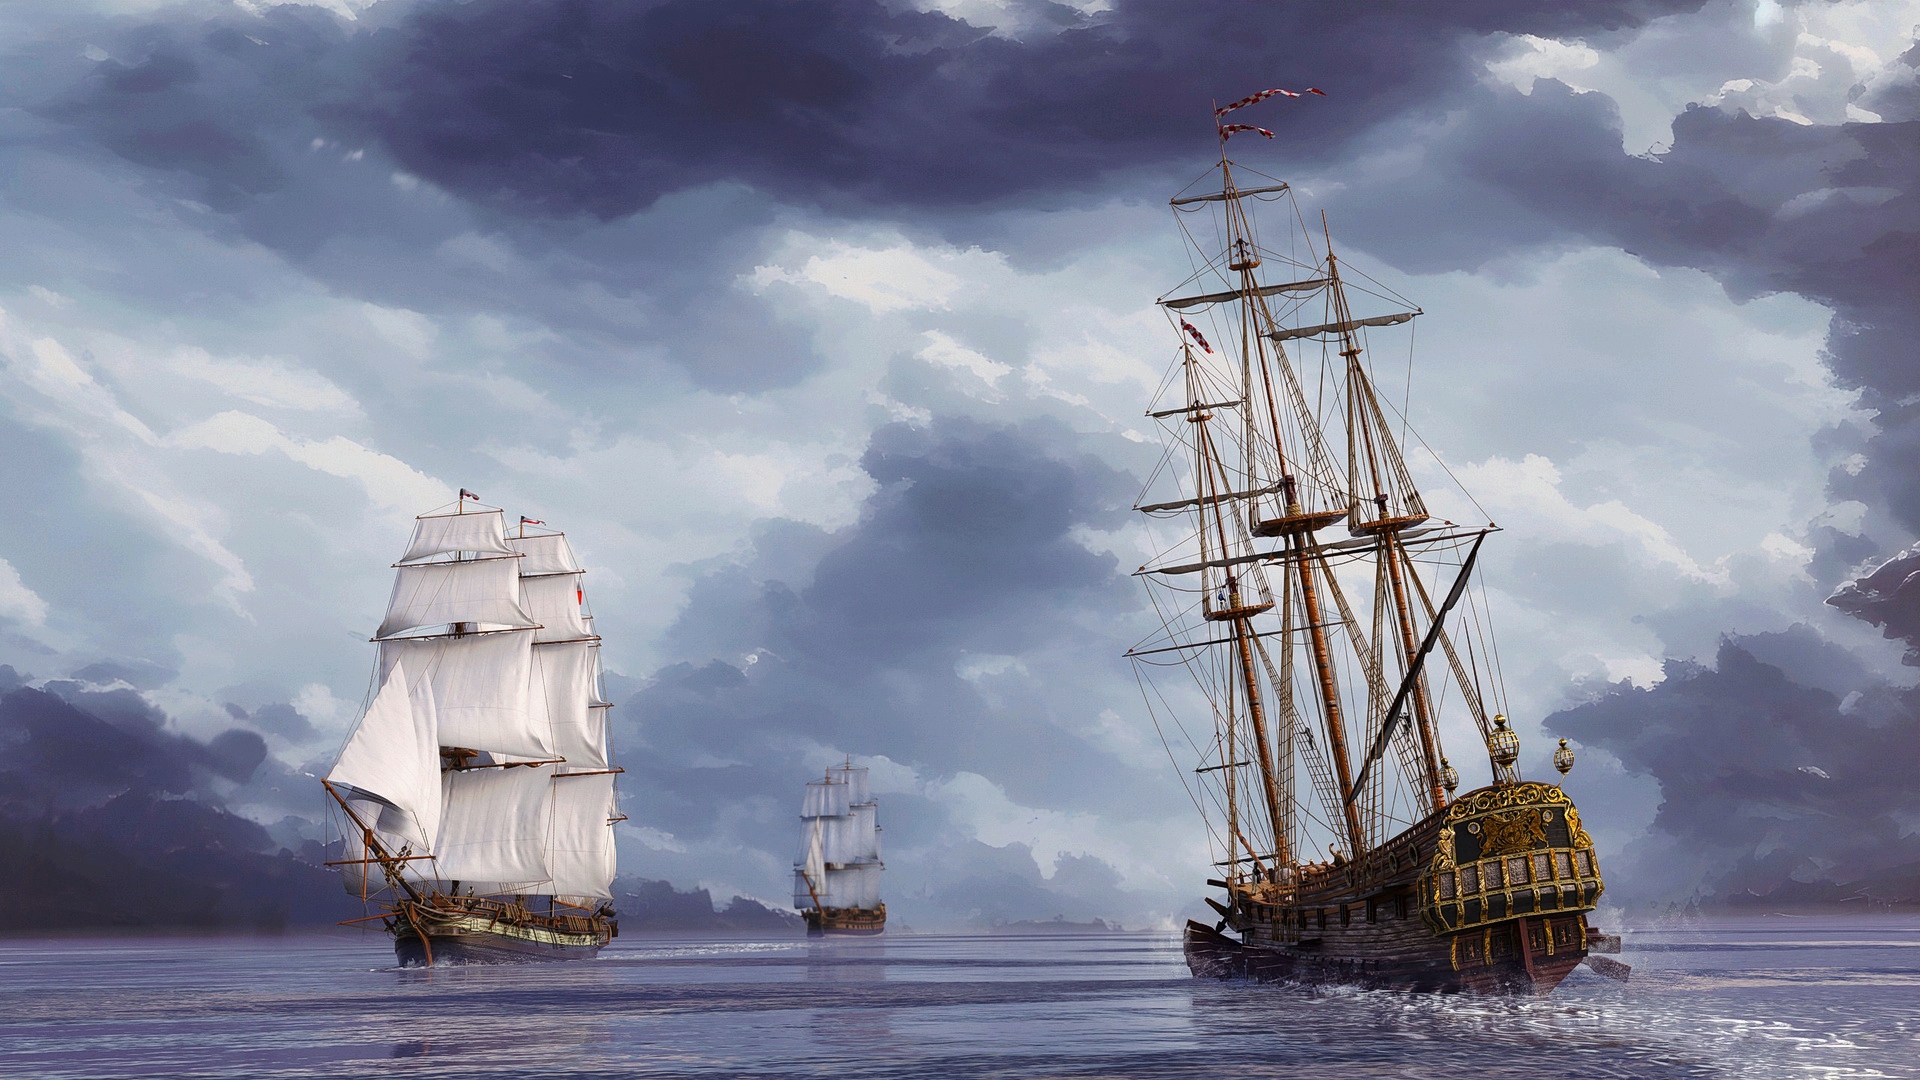 Ships with white sails